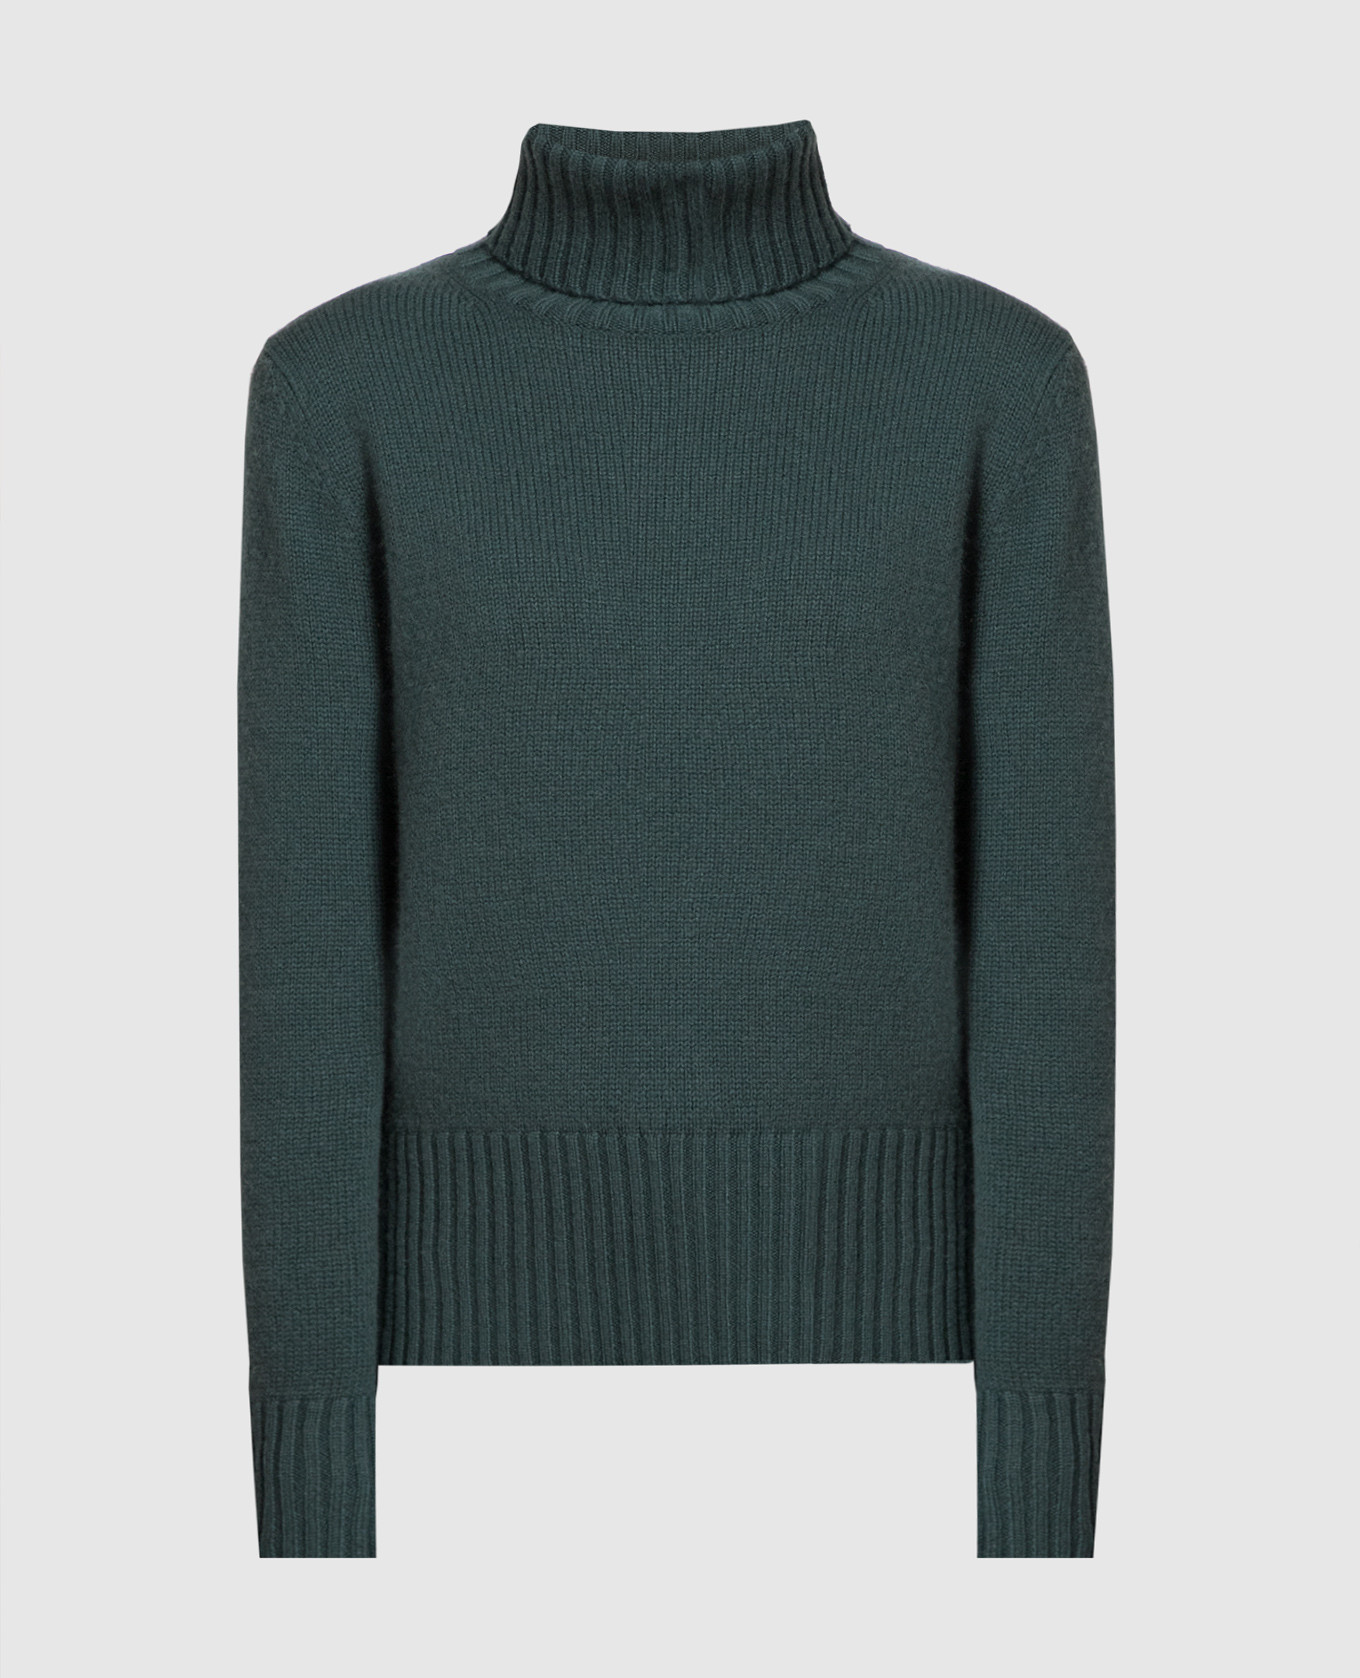 Green wool and cashmere sweater